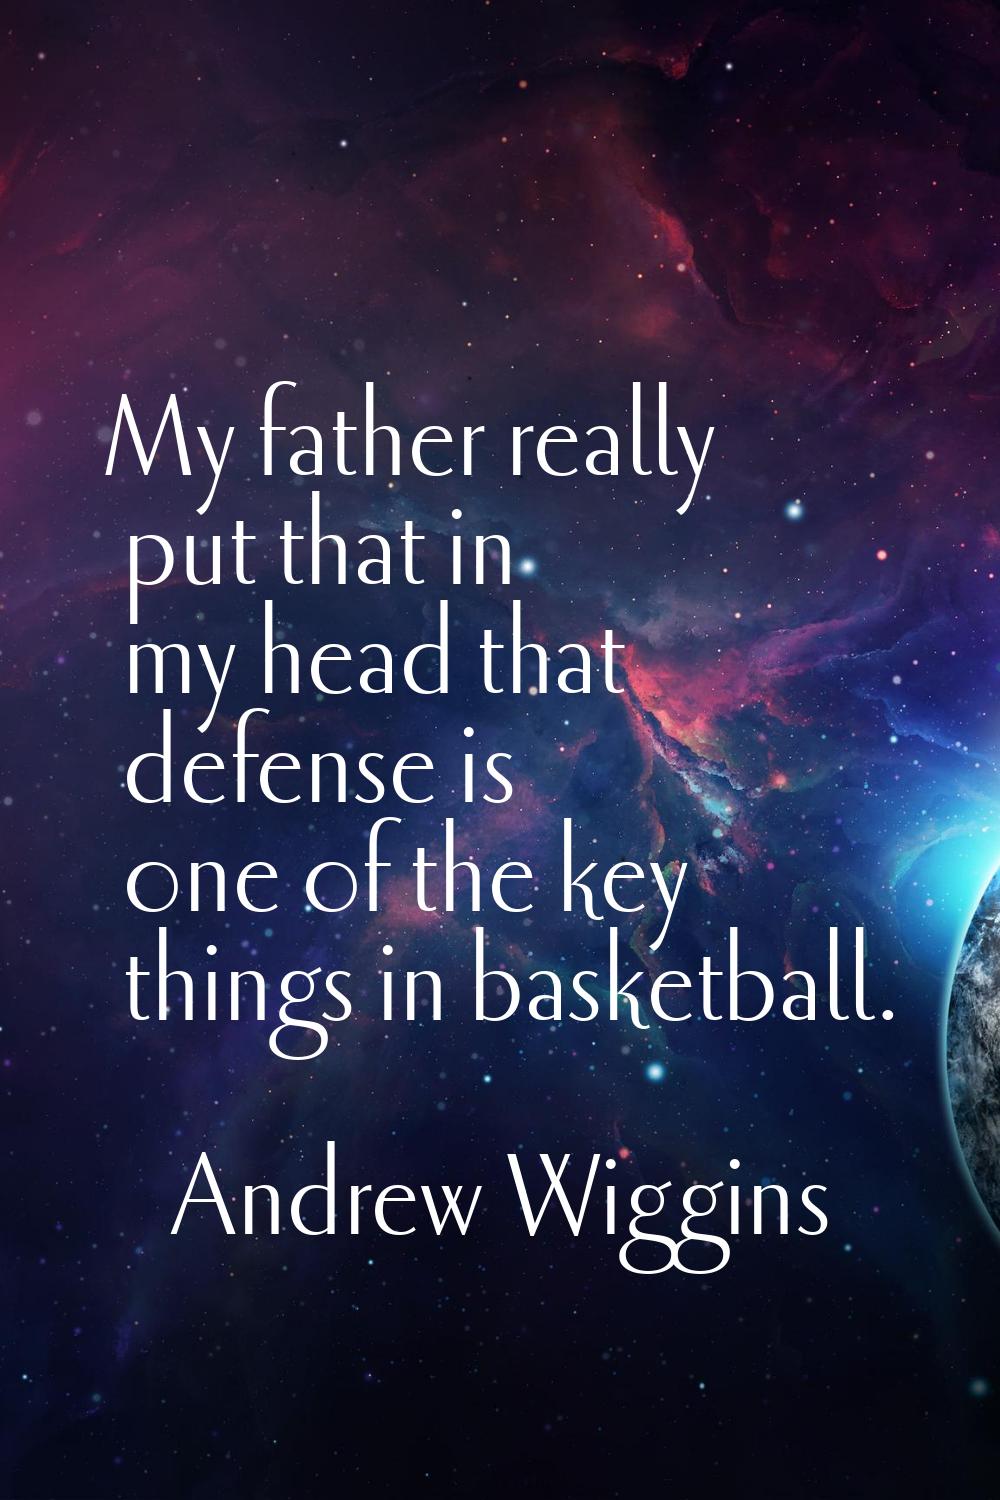 My father really put that in my head that defense is one of the key things in basketball.